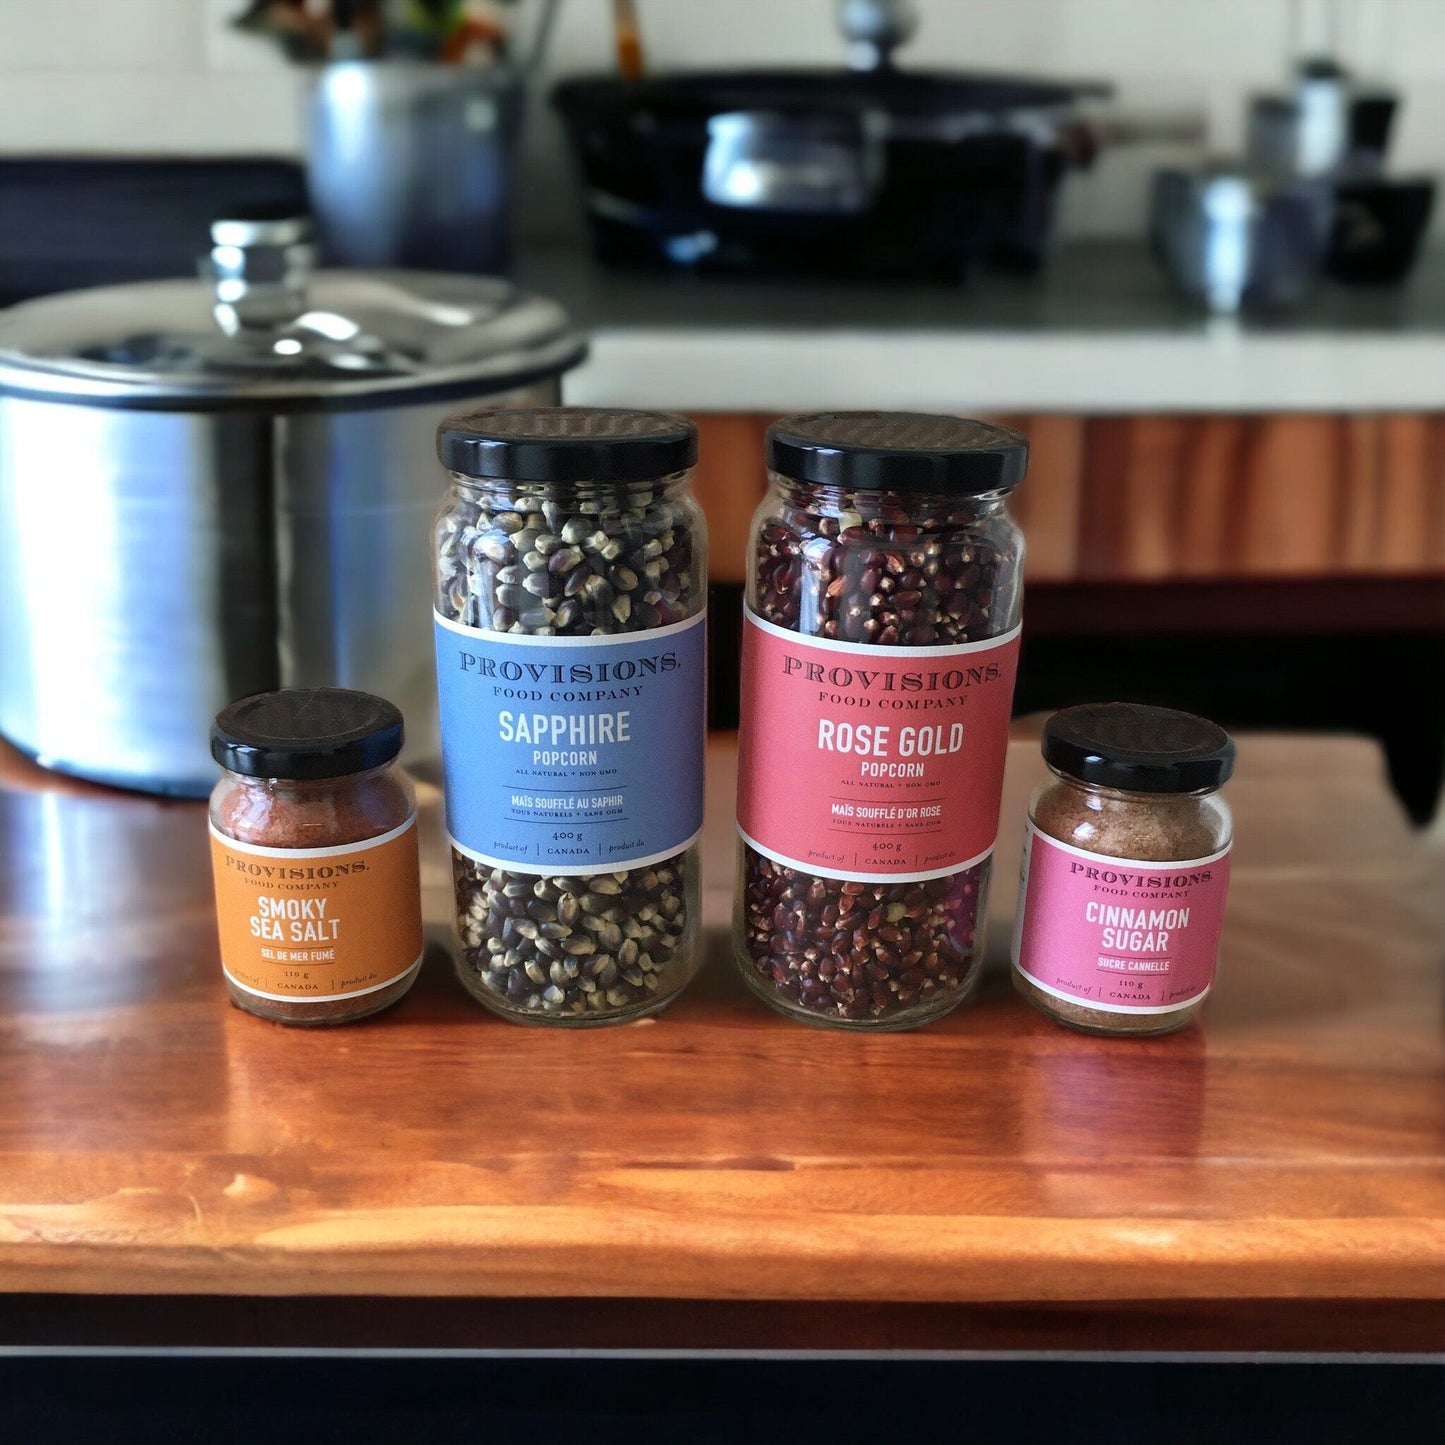 ZERO WASTE MOVIE NIGHT POPCORN MAKING KIT - LOCALLY HARVESTED ROSE GOLD & SAPPHIRE BLUE KERNELS WITH SMALL BATCH TOPPINGS